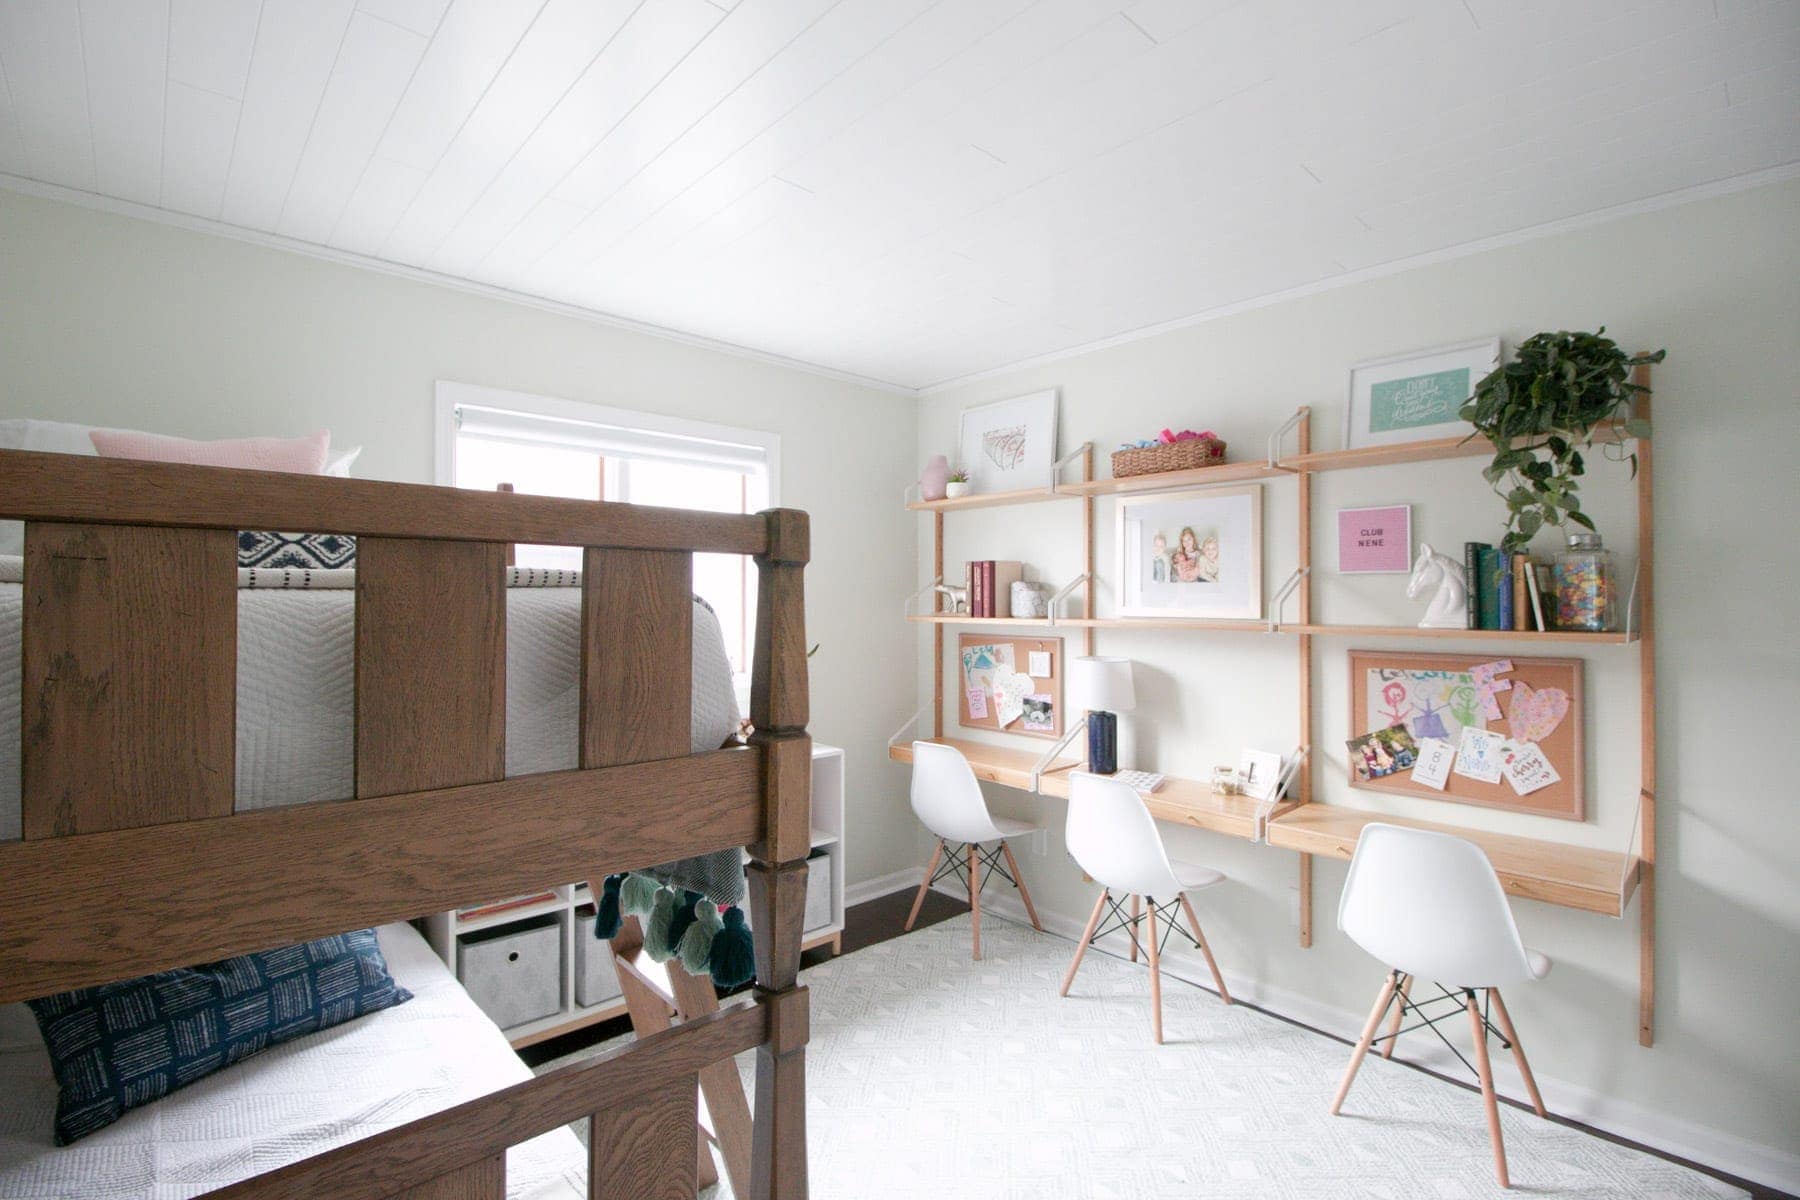 3 desks in a playroom of this kids' room makeover. 